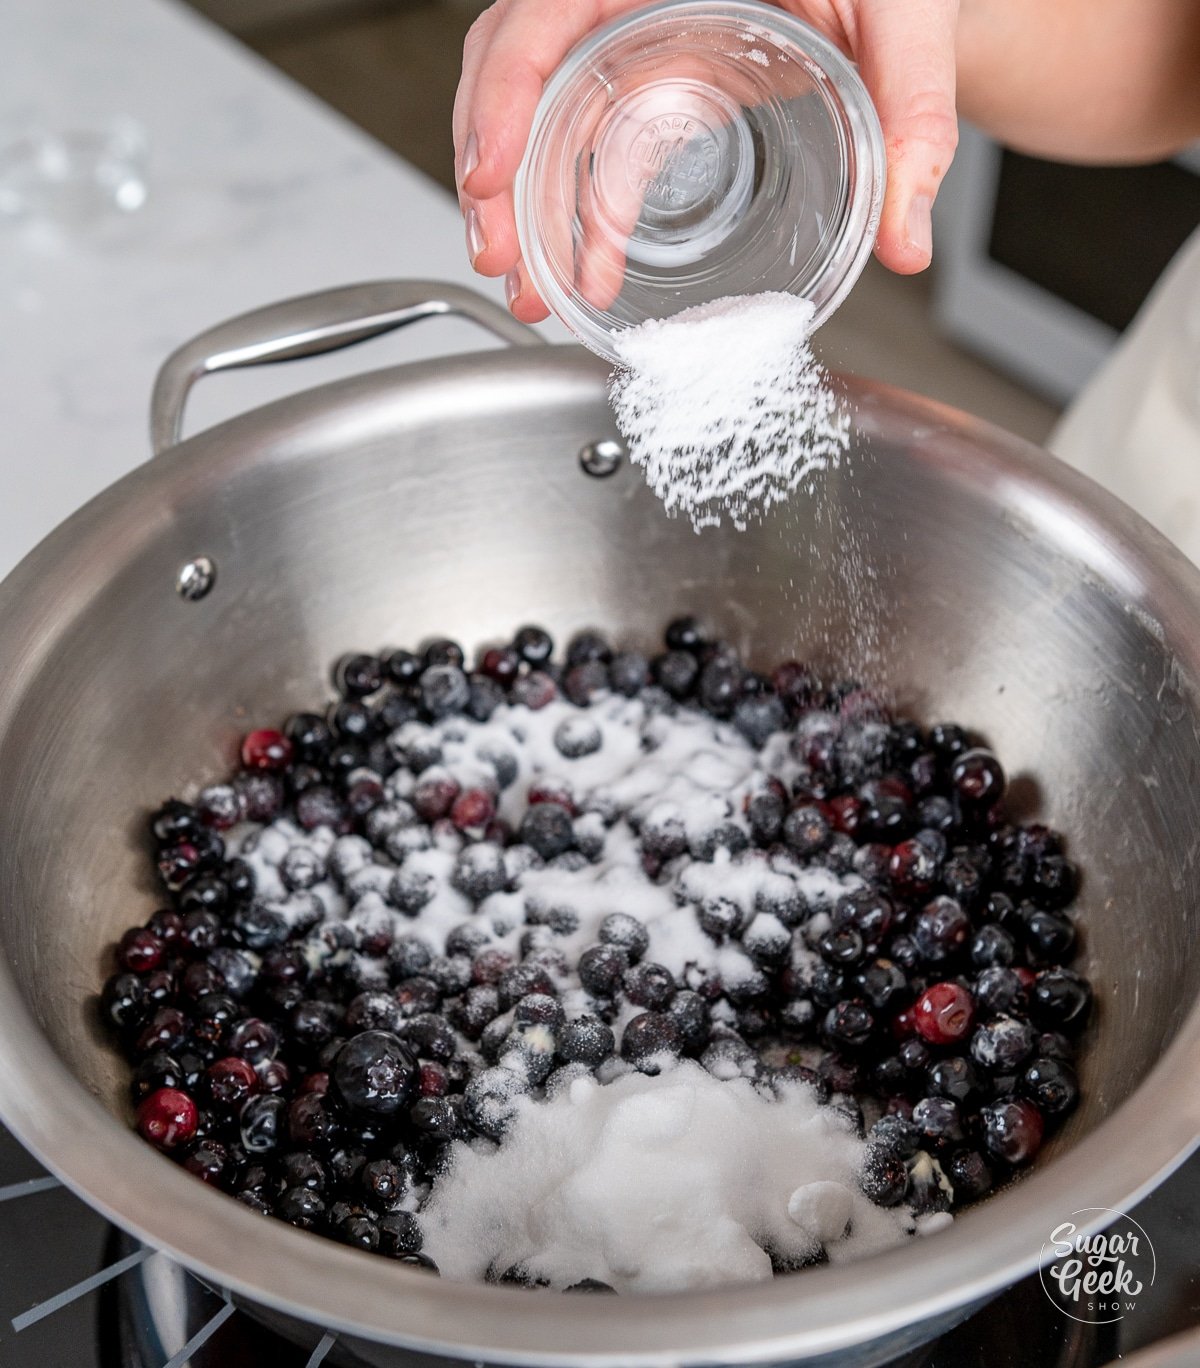 hand adding sugar to cooking blueberry mixture in a pot.